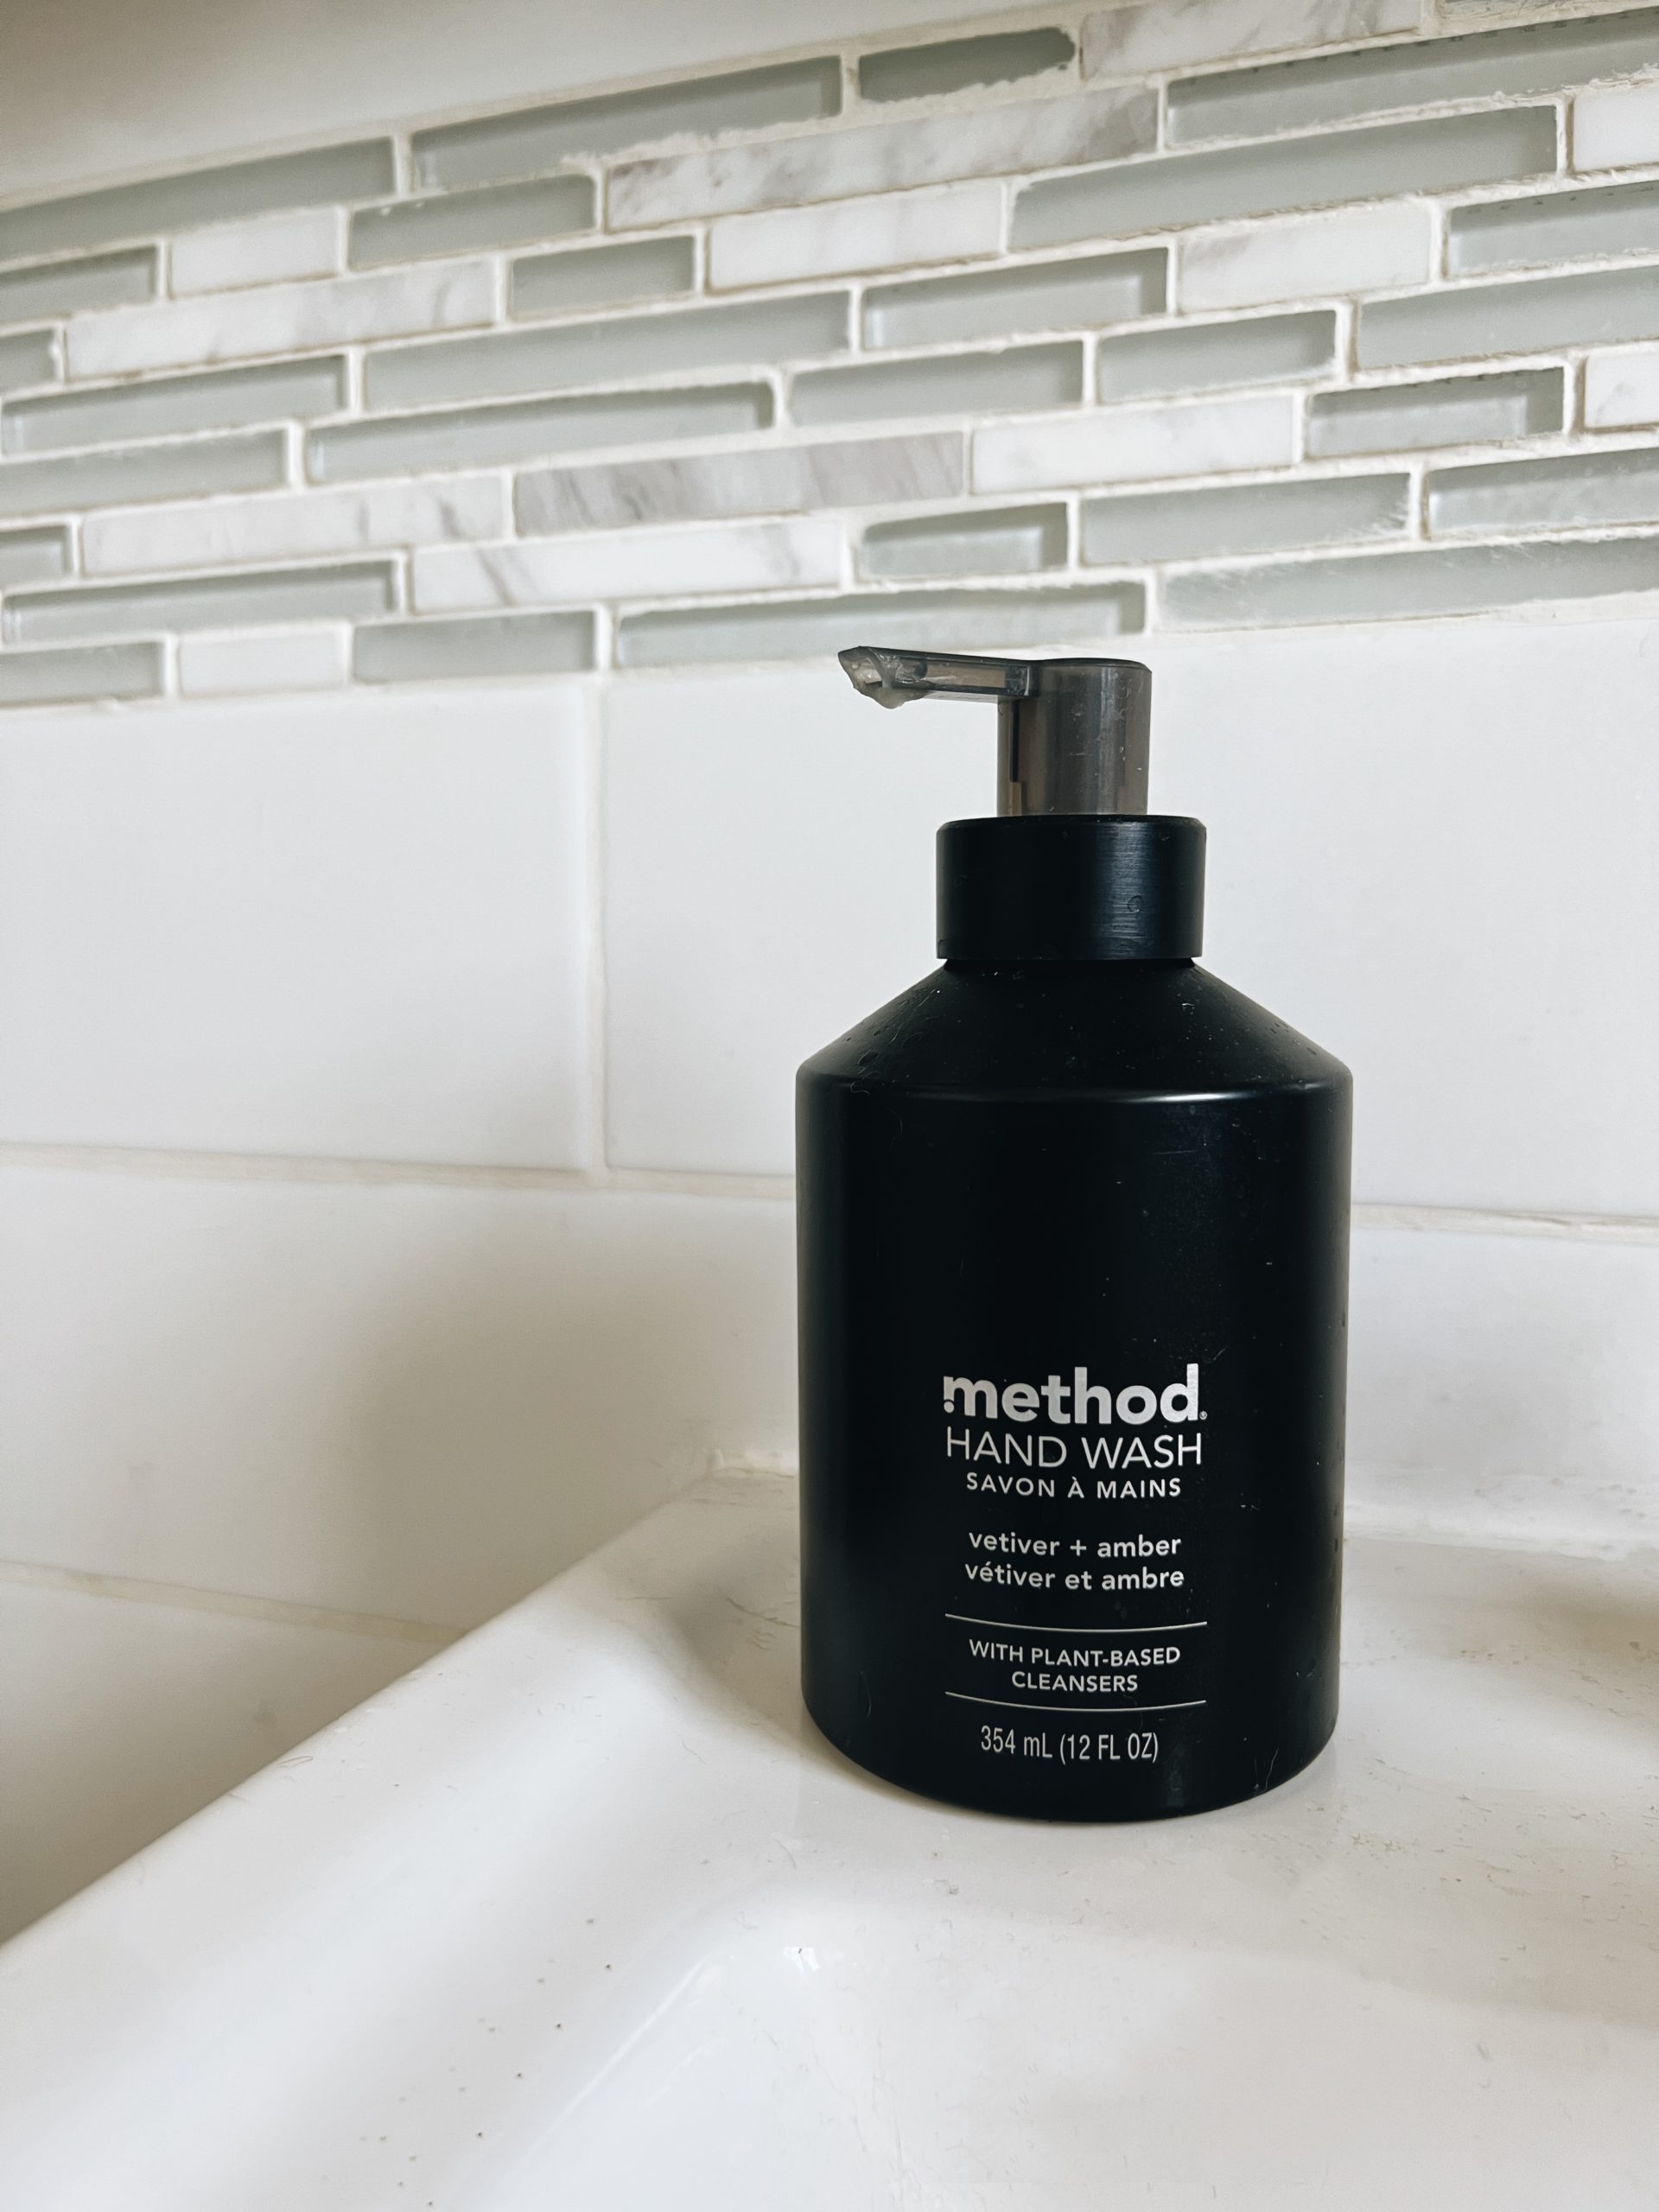 one of the Things Making Me Happy: 9.13.22 is the method hand wash